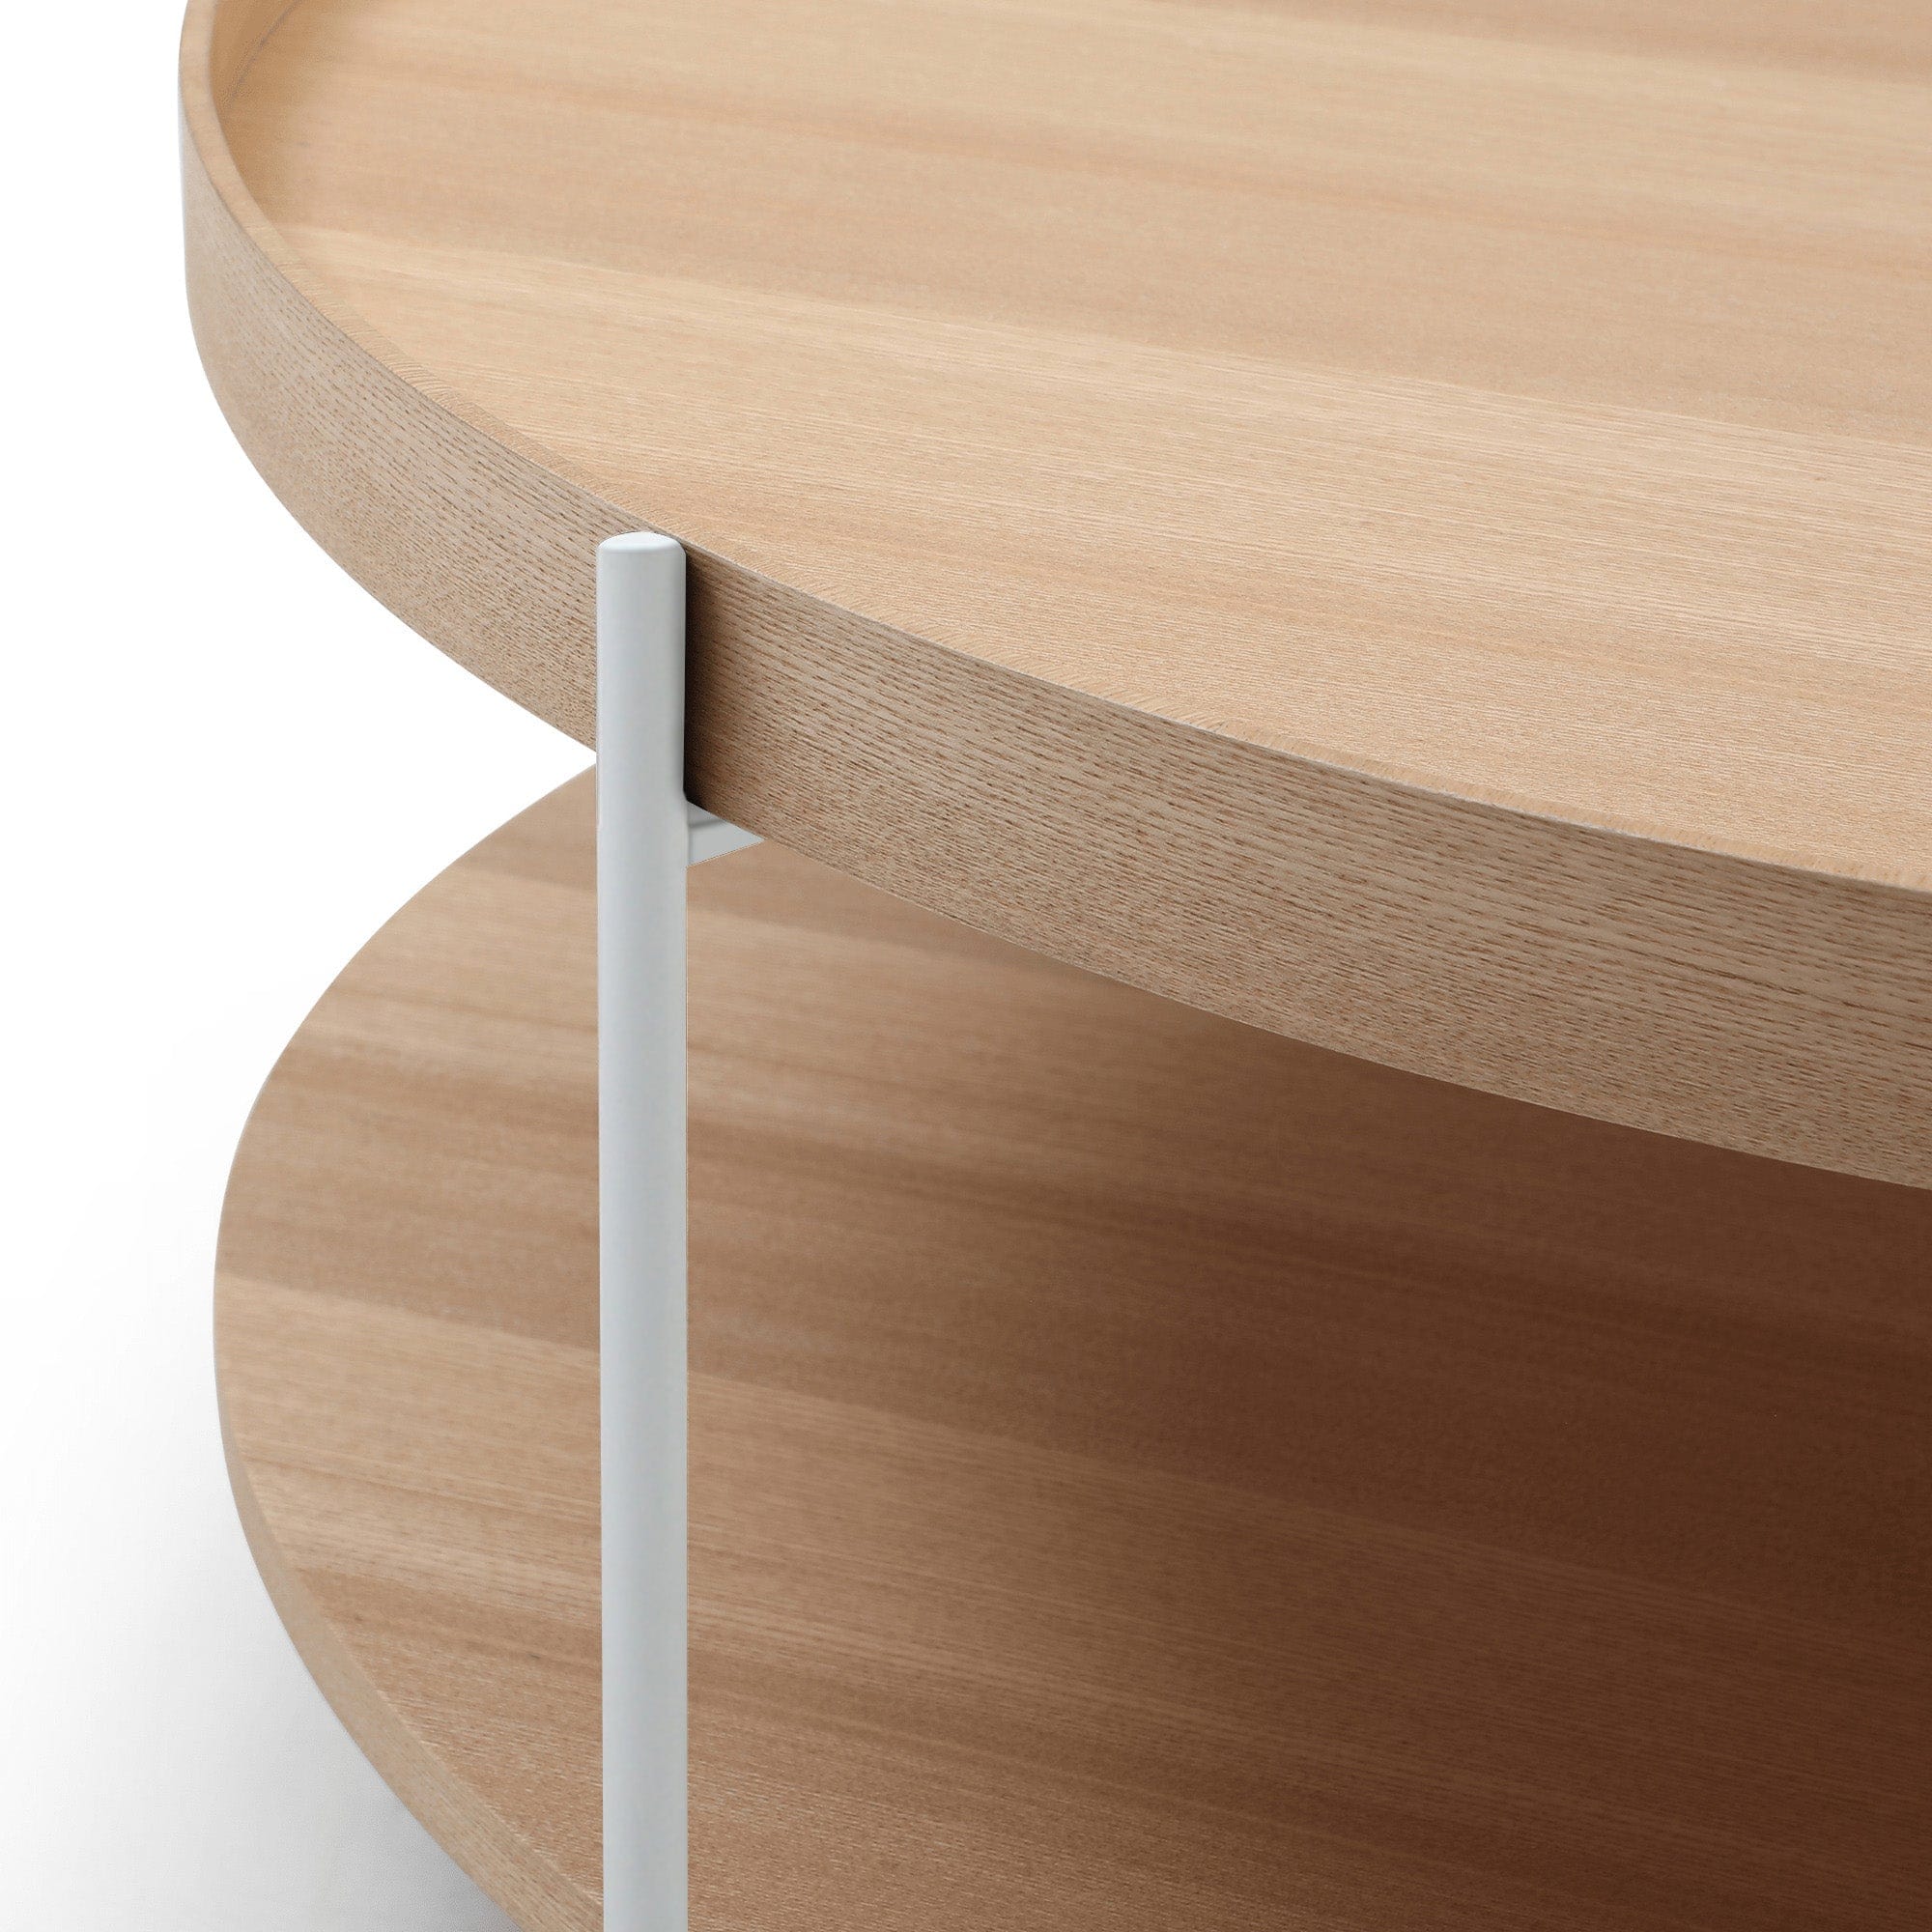 Seek & Ramble Side Tables Cleo 40cm Round Side Table With Storage Shelf Ash White Legs